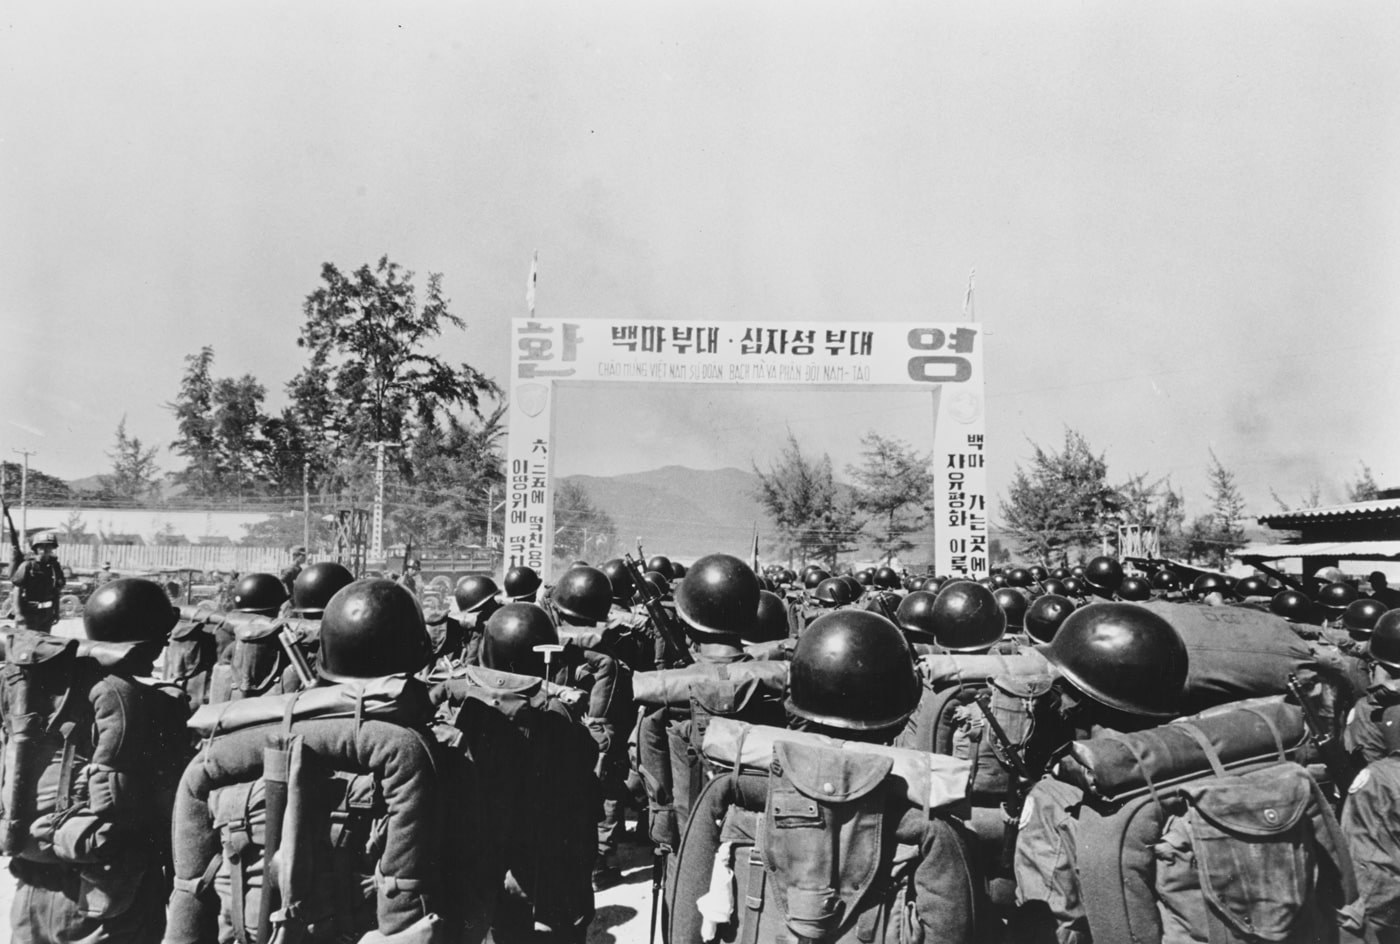 This photo is of the 9th Infantry Division arriving in South Vietnam. The 9th Infantry Division, also known as White Horse Division after the victory of Battle of White Horse Hill, is an infantry division of the Republic of Korea Army. The unit is composed of the 28th, 29th, 30th infantry brigades, and an artillery brigade.